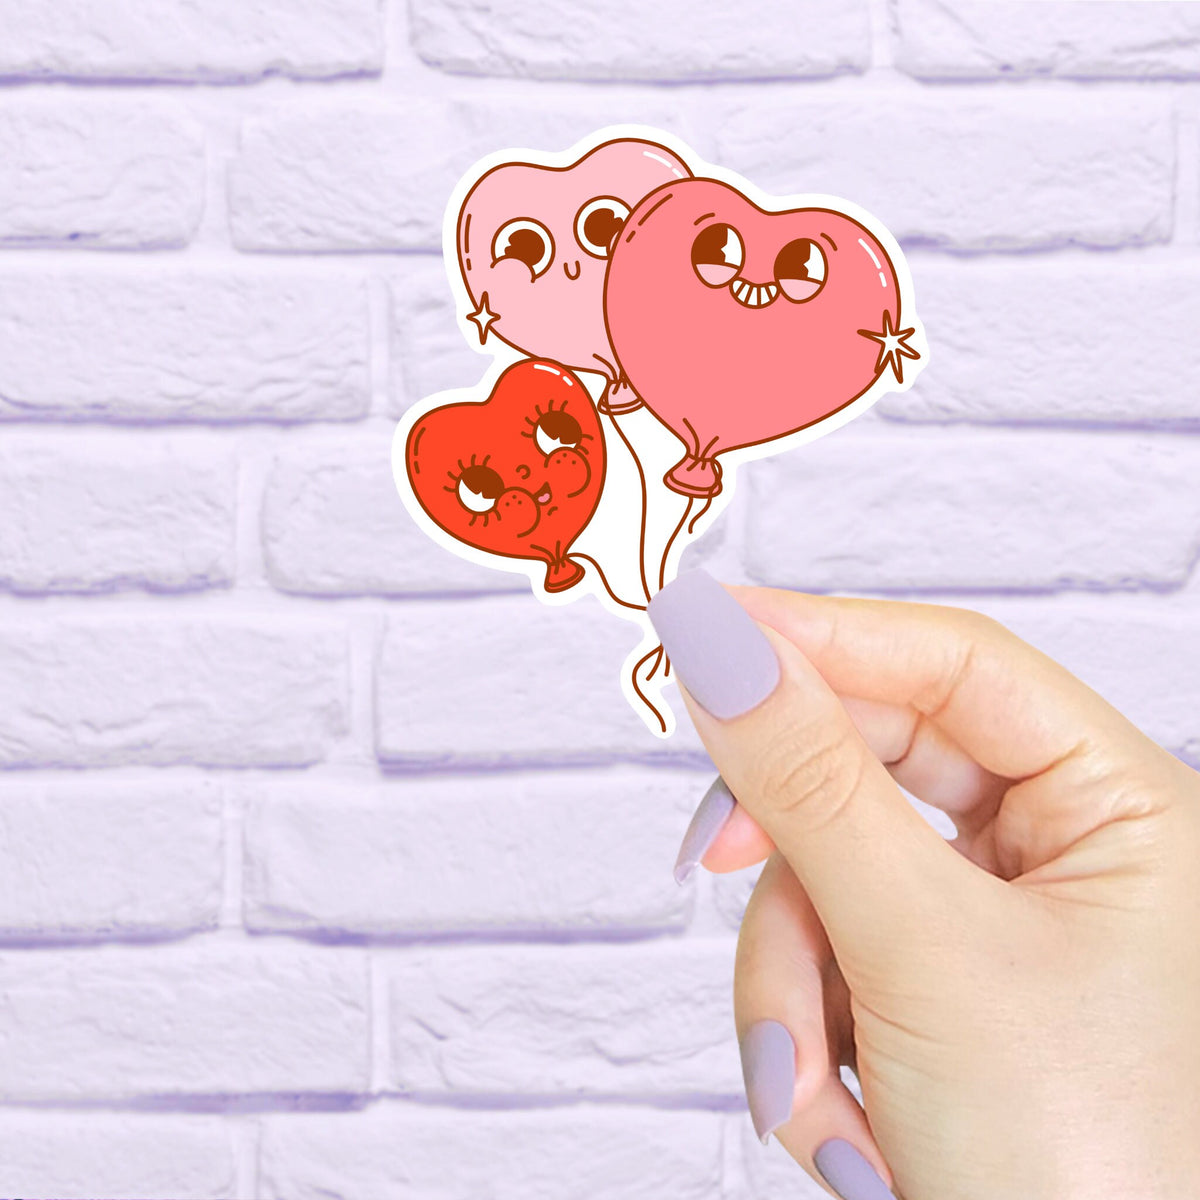 Valentines Day Sticker Pack, Kindle Sticker, Mental Health Stickers, Aesthetic Stickers, Cute Stickers